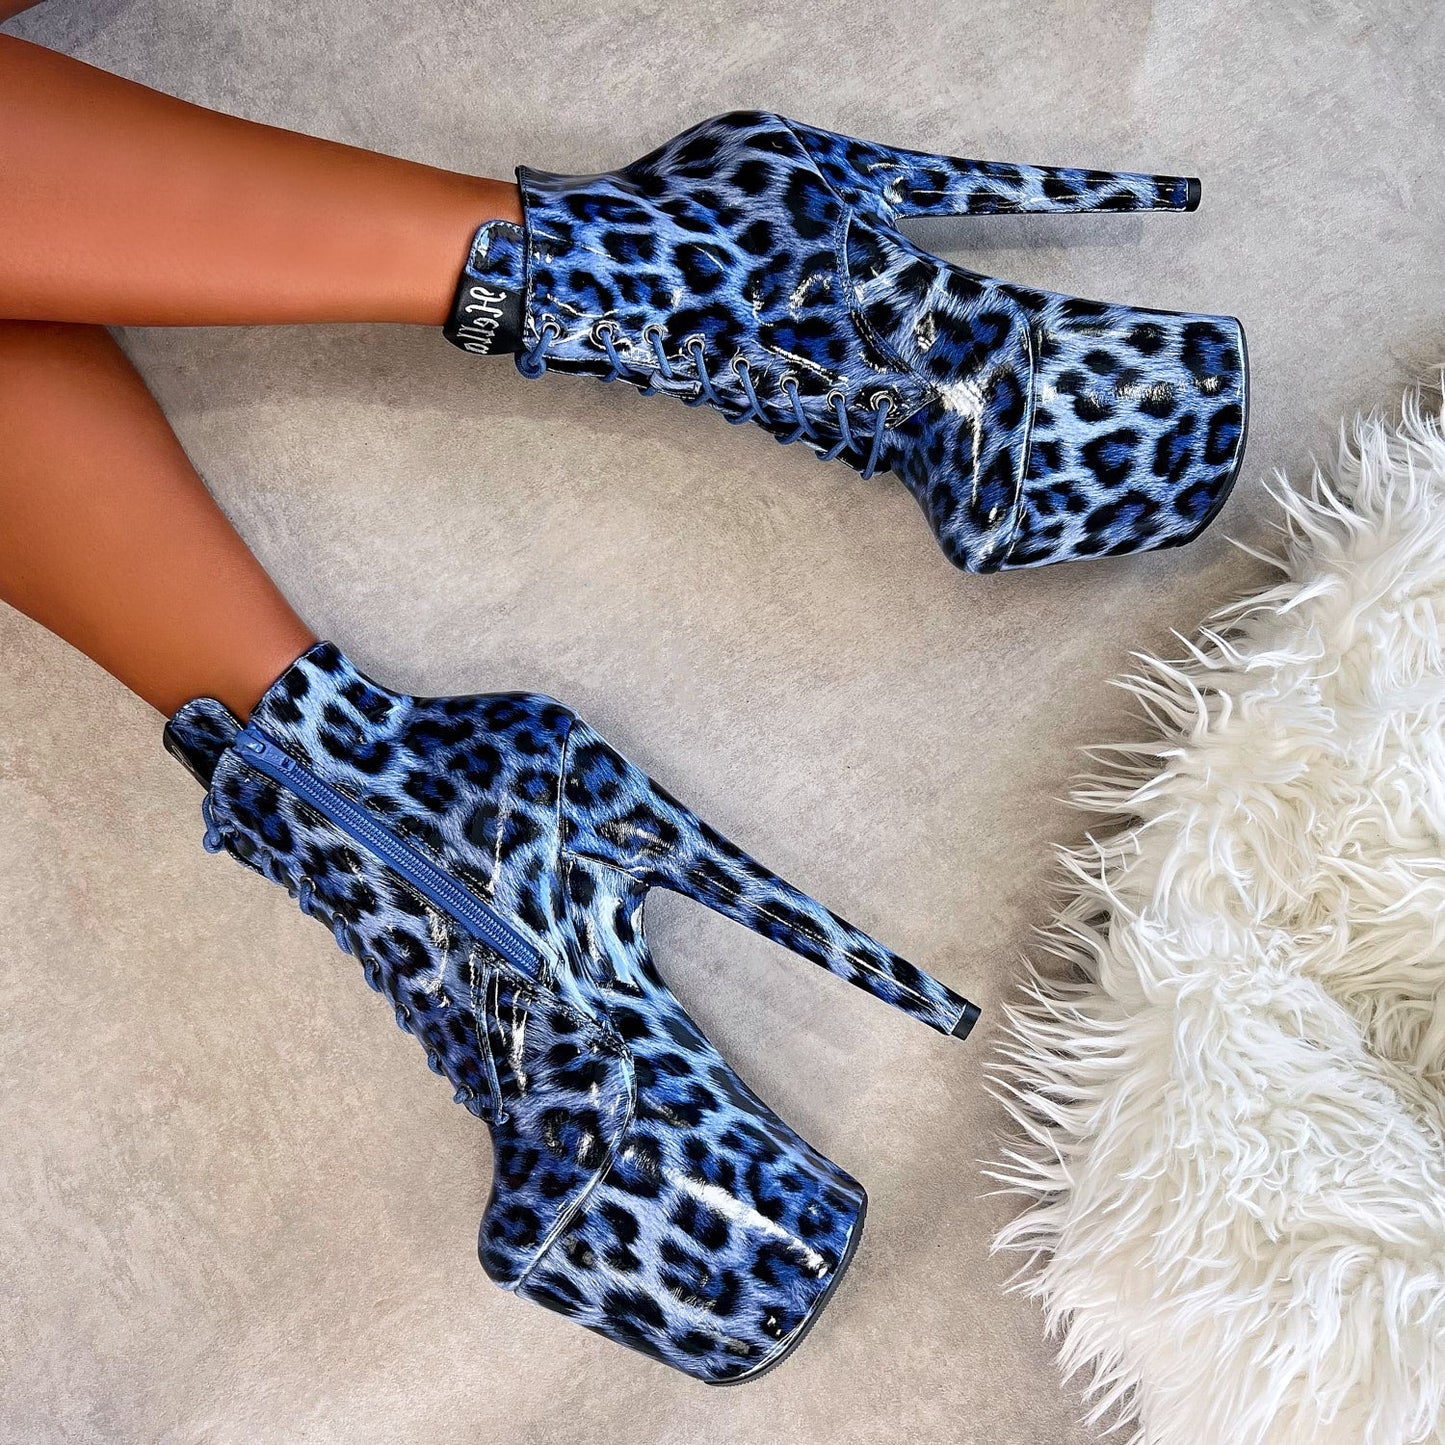 Blue Leopard Ankle Boot - 8 INCH + SP